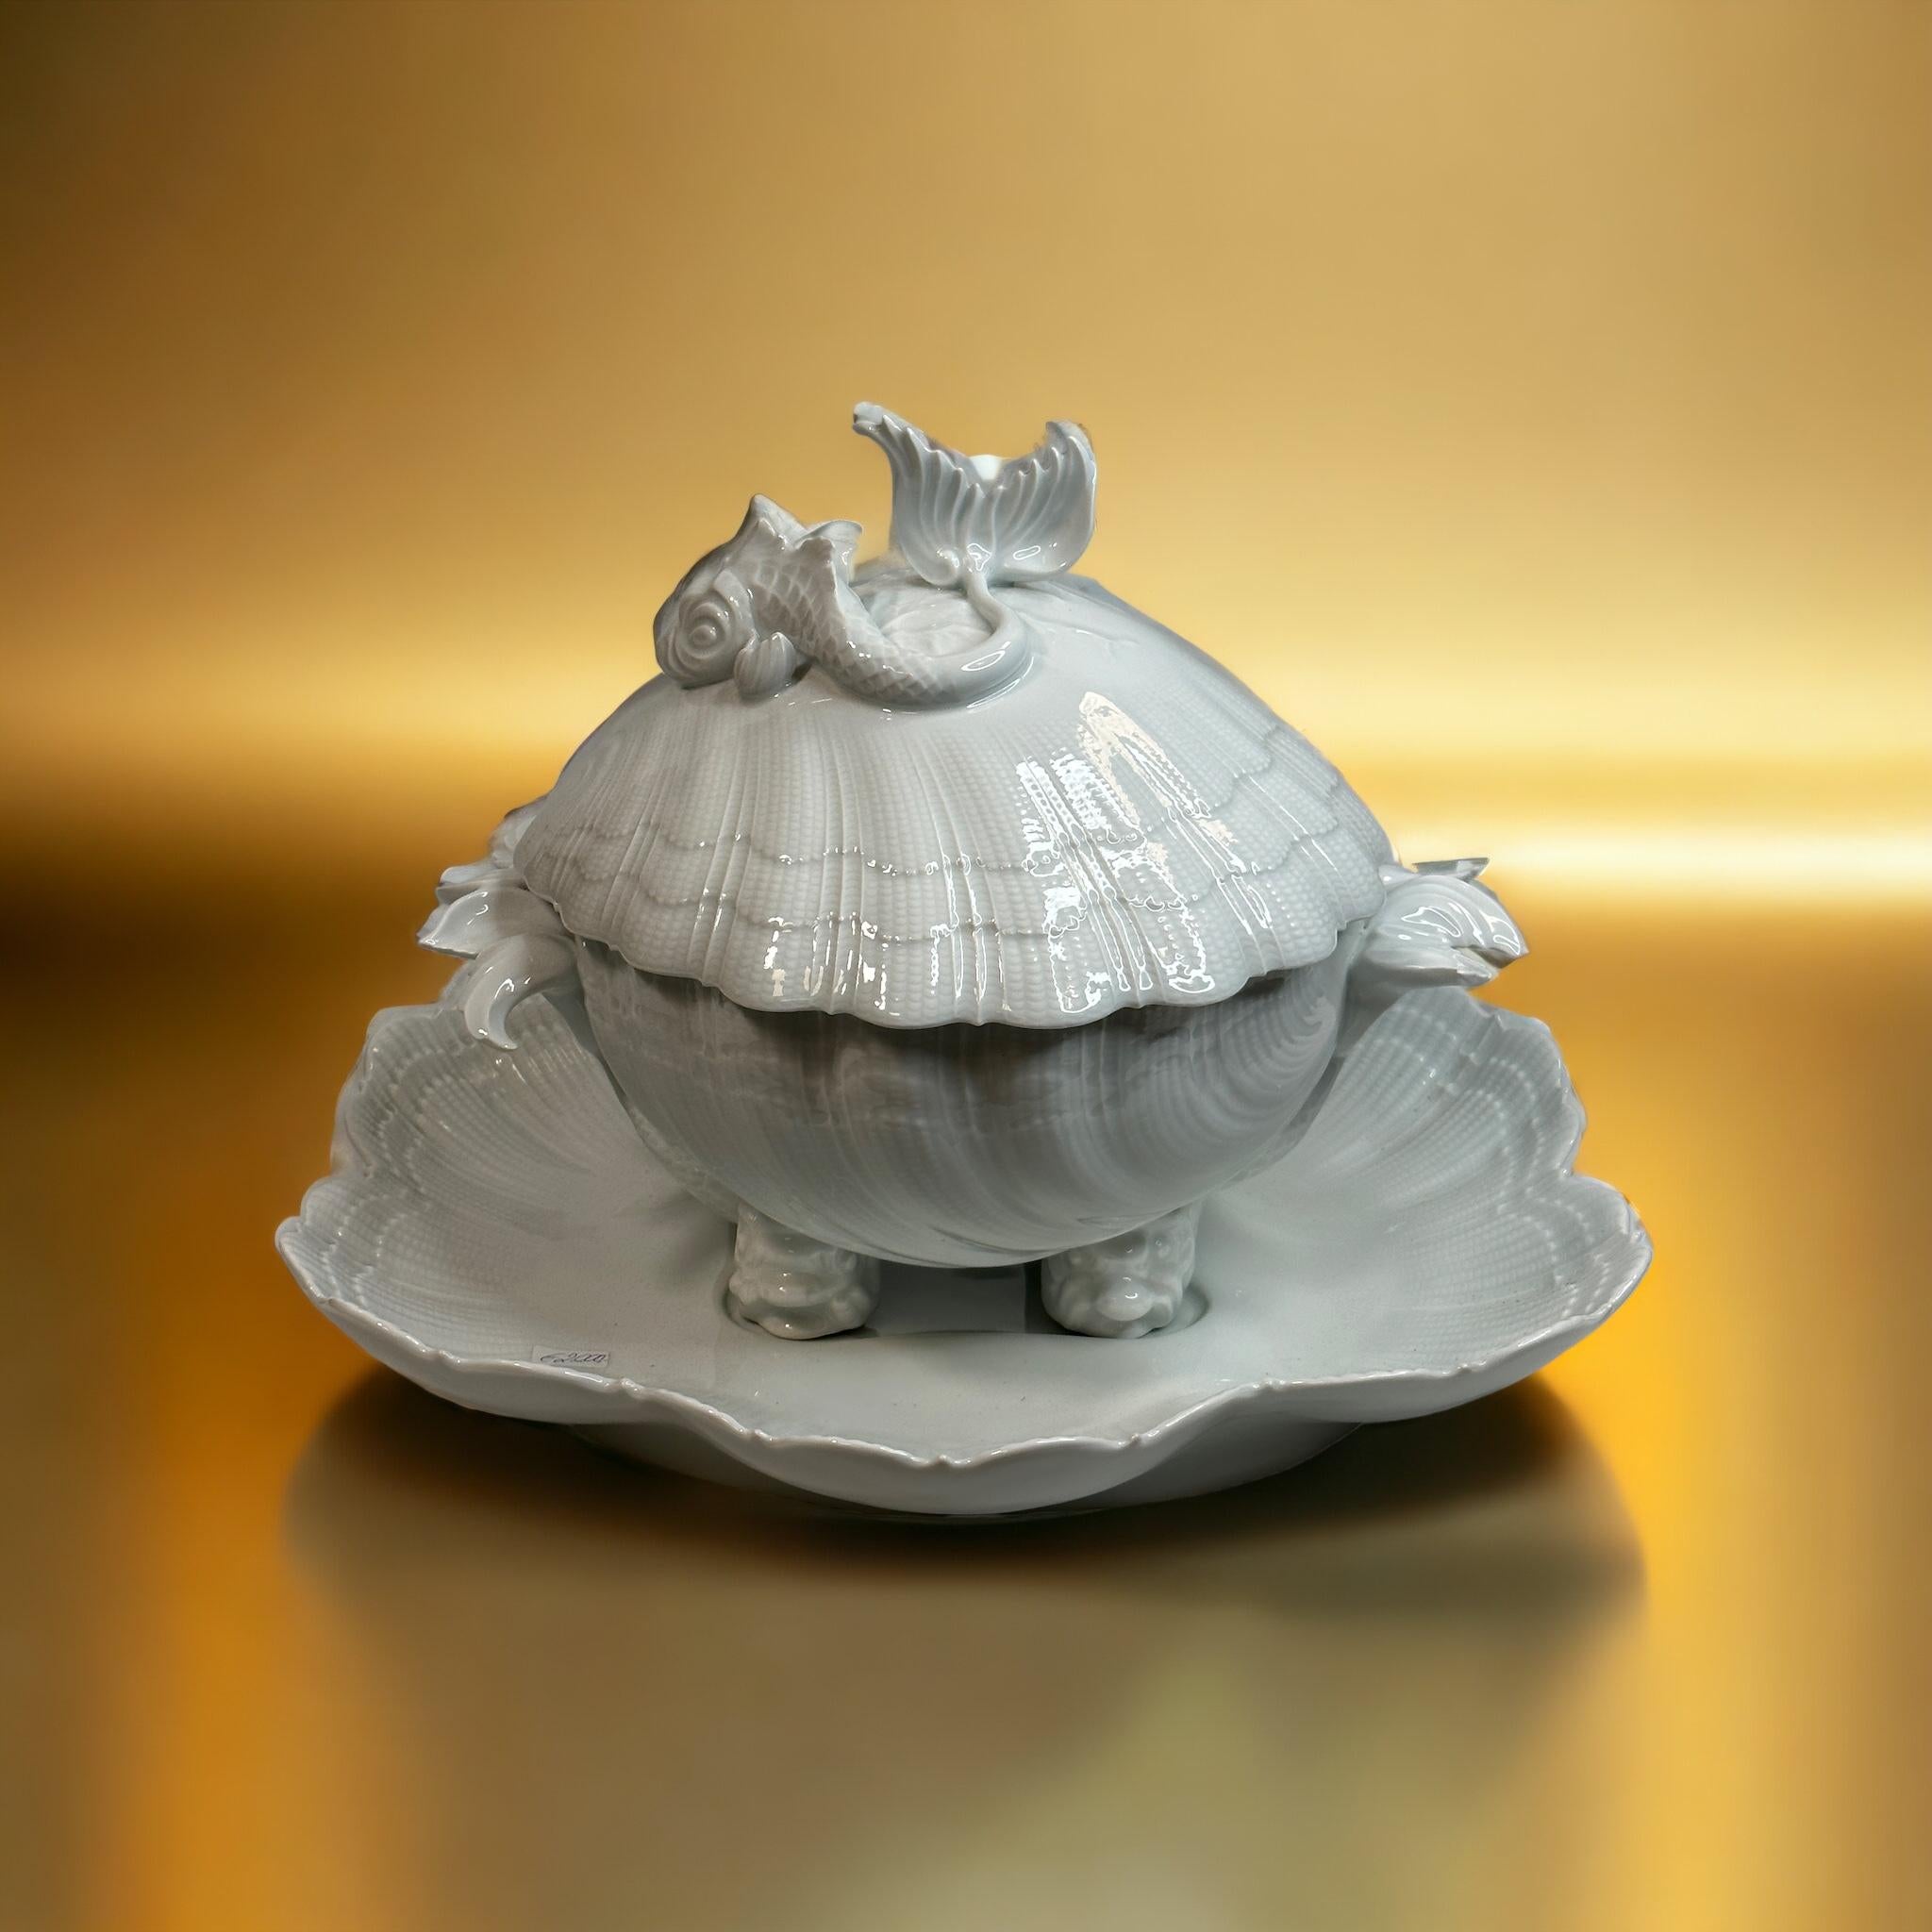 A gorgeous impressive soup tureen with its display in the shape of a shell and fish in white Limoges porcelain in perfect condition. Fantastic piece for each table. In used but still very good condition. A nice addition to any table or just for